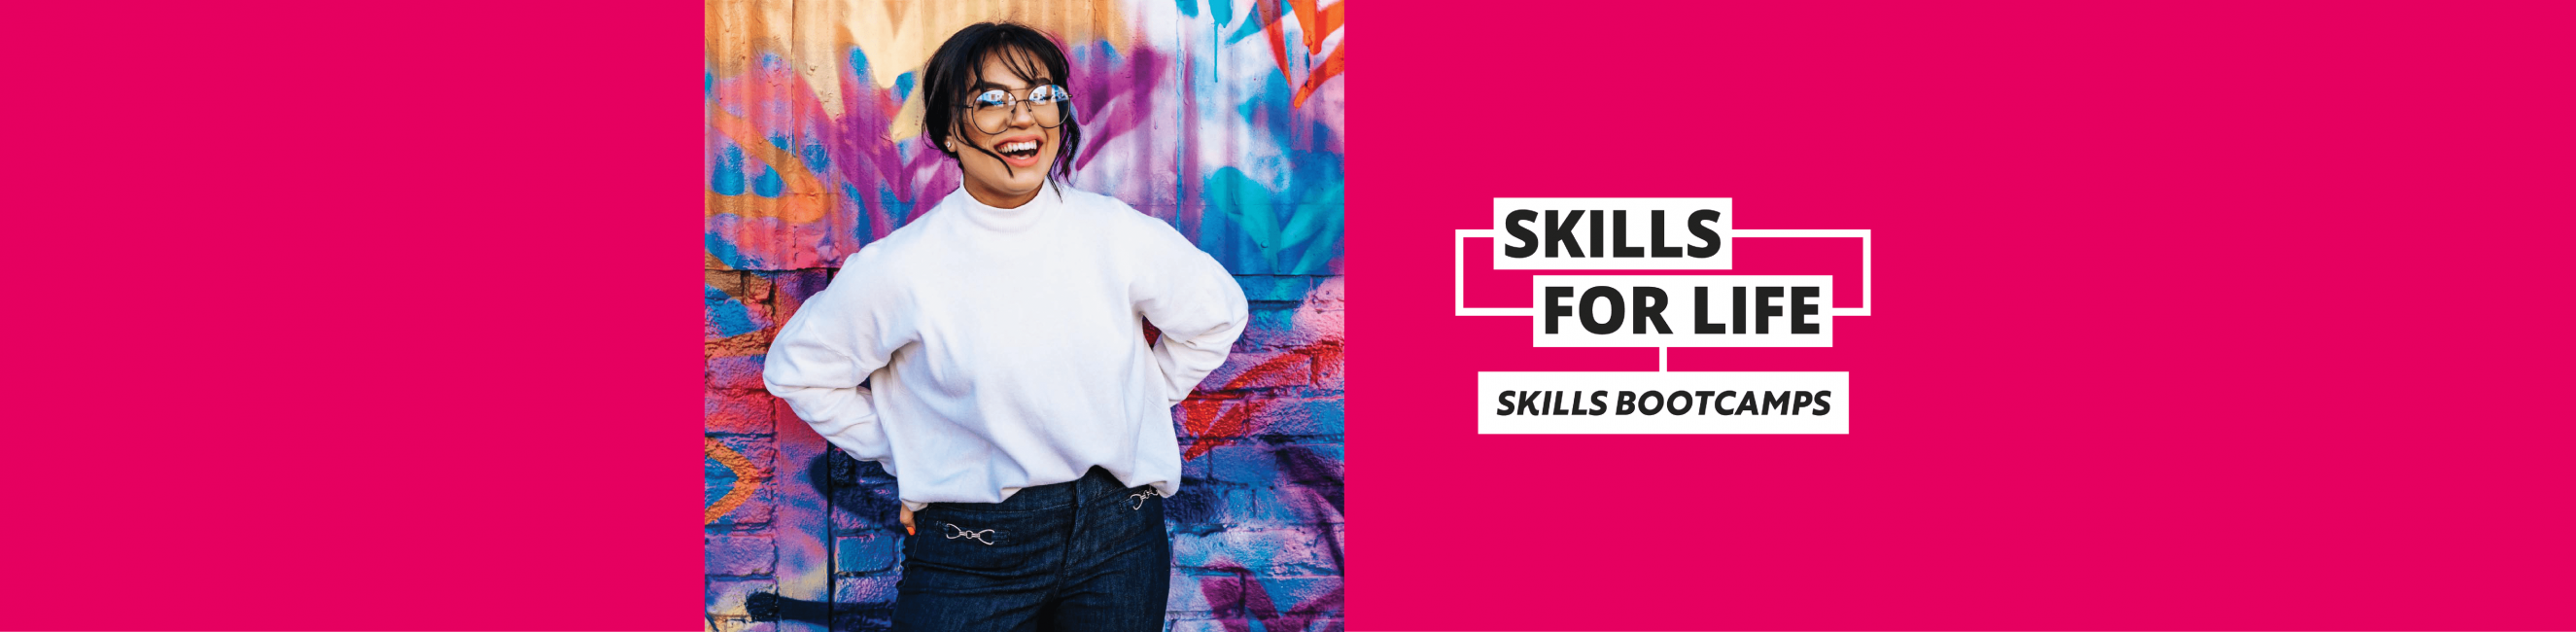 skills for life logo and young women